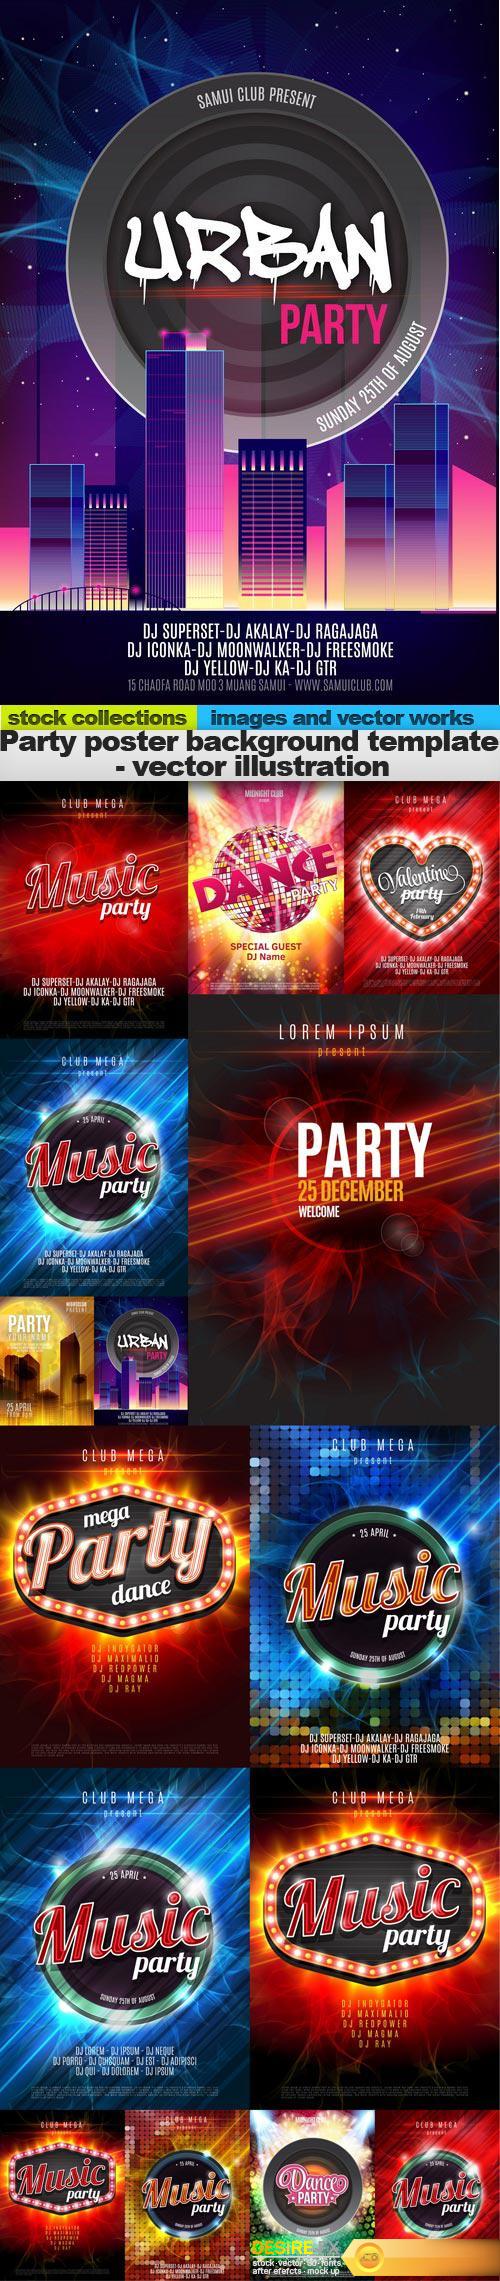 Party poster background template - vector illustration, 15 x EPS